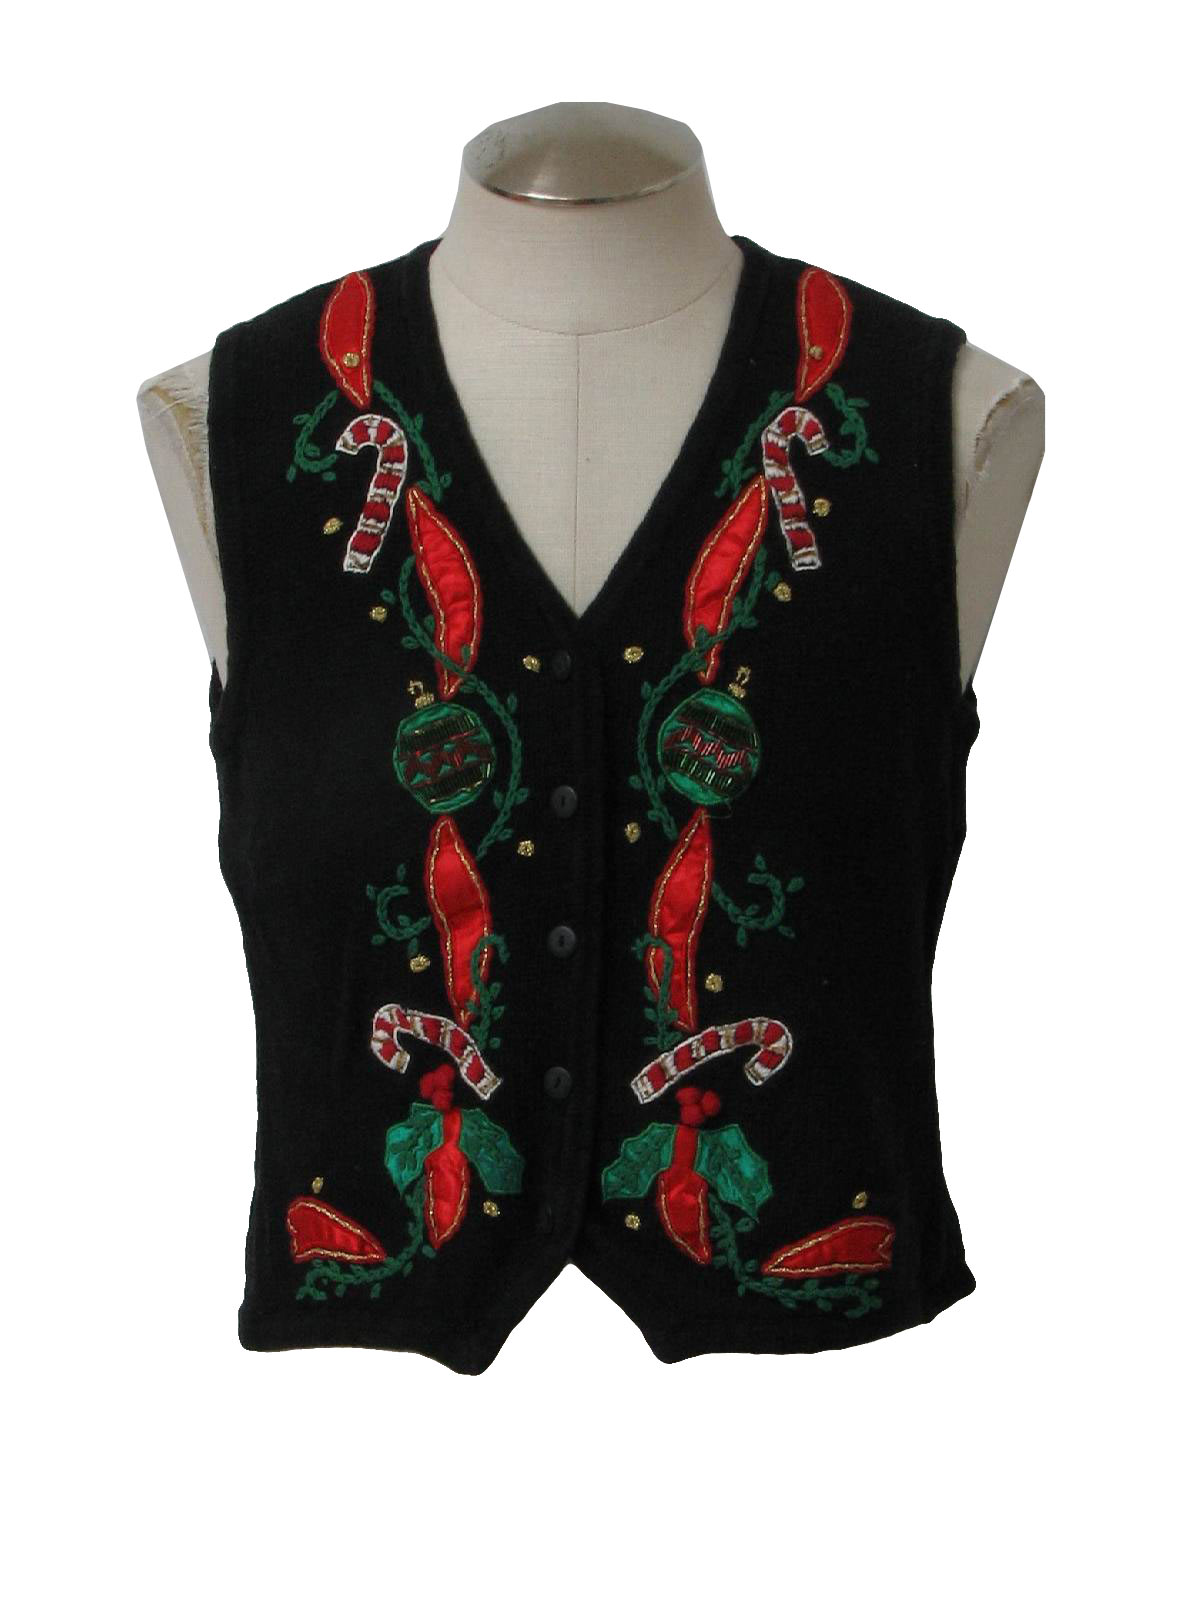 Womens Ugly Christmas Sweater Vest: -Kathie Lee- Womens black ...